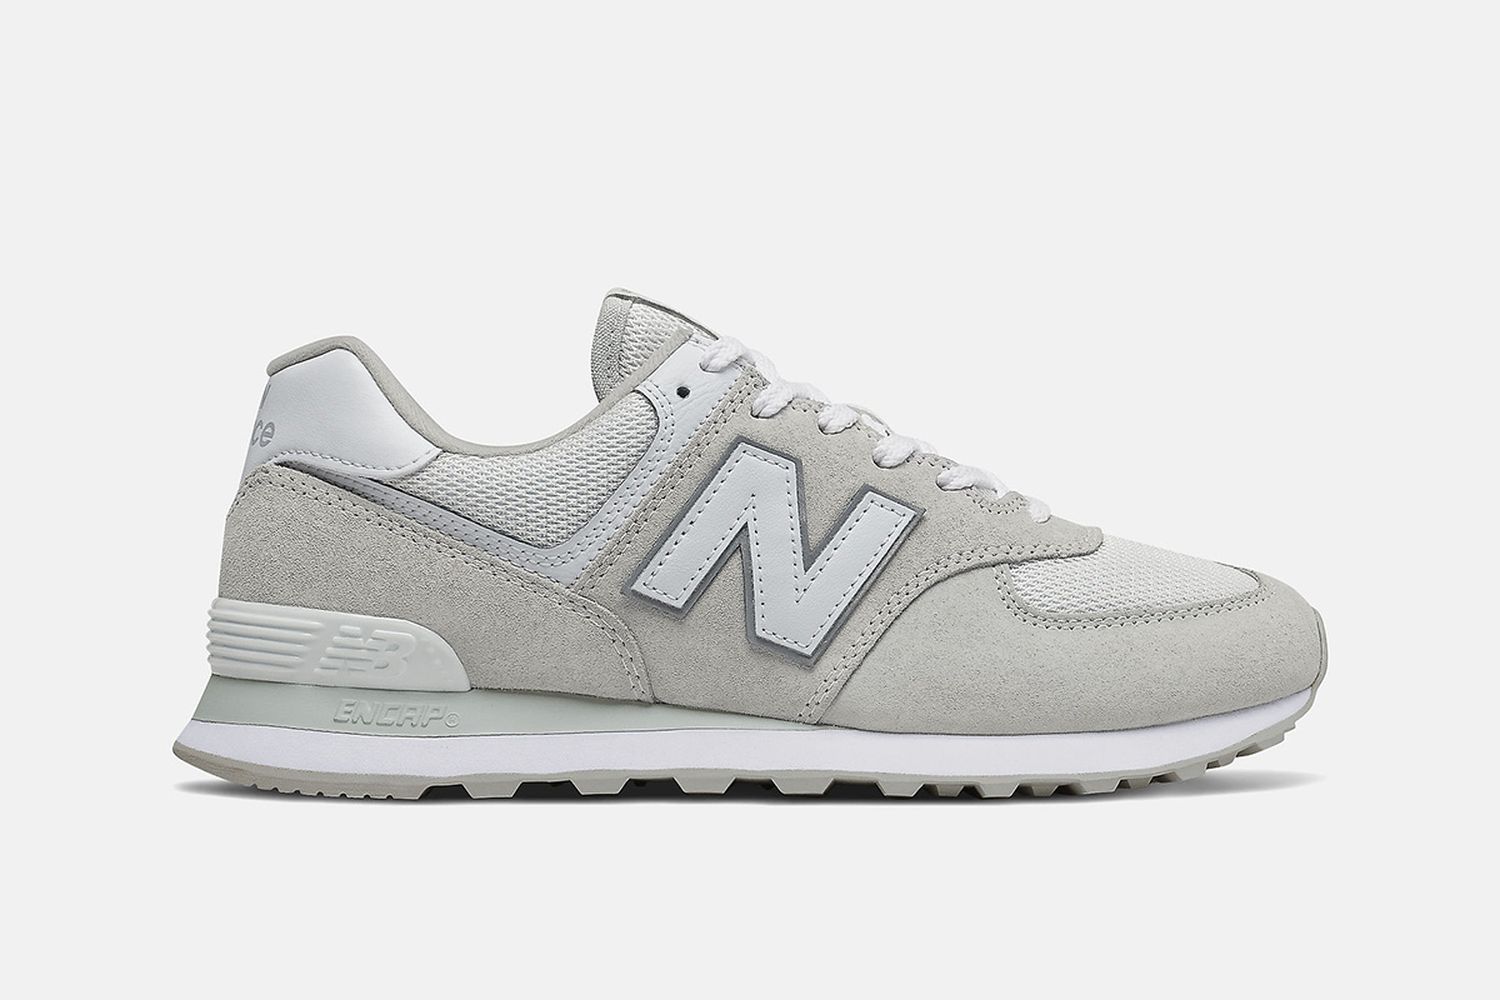 Italian beetle spend 10 of the Best Grey New Balance Sneakers